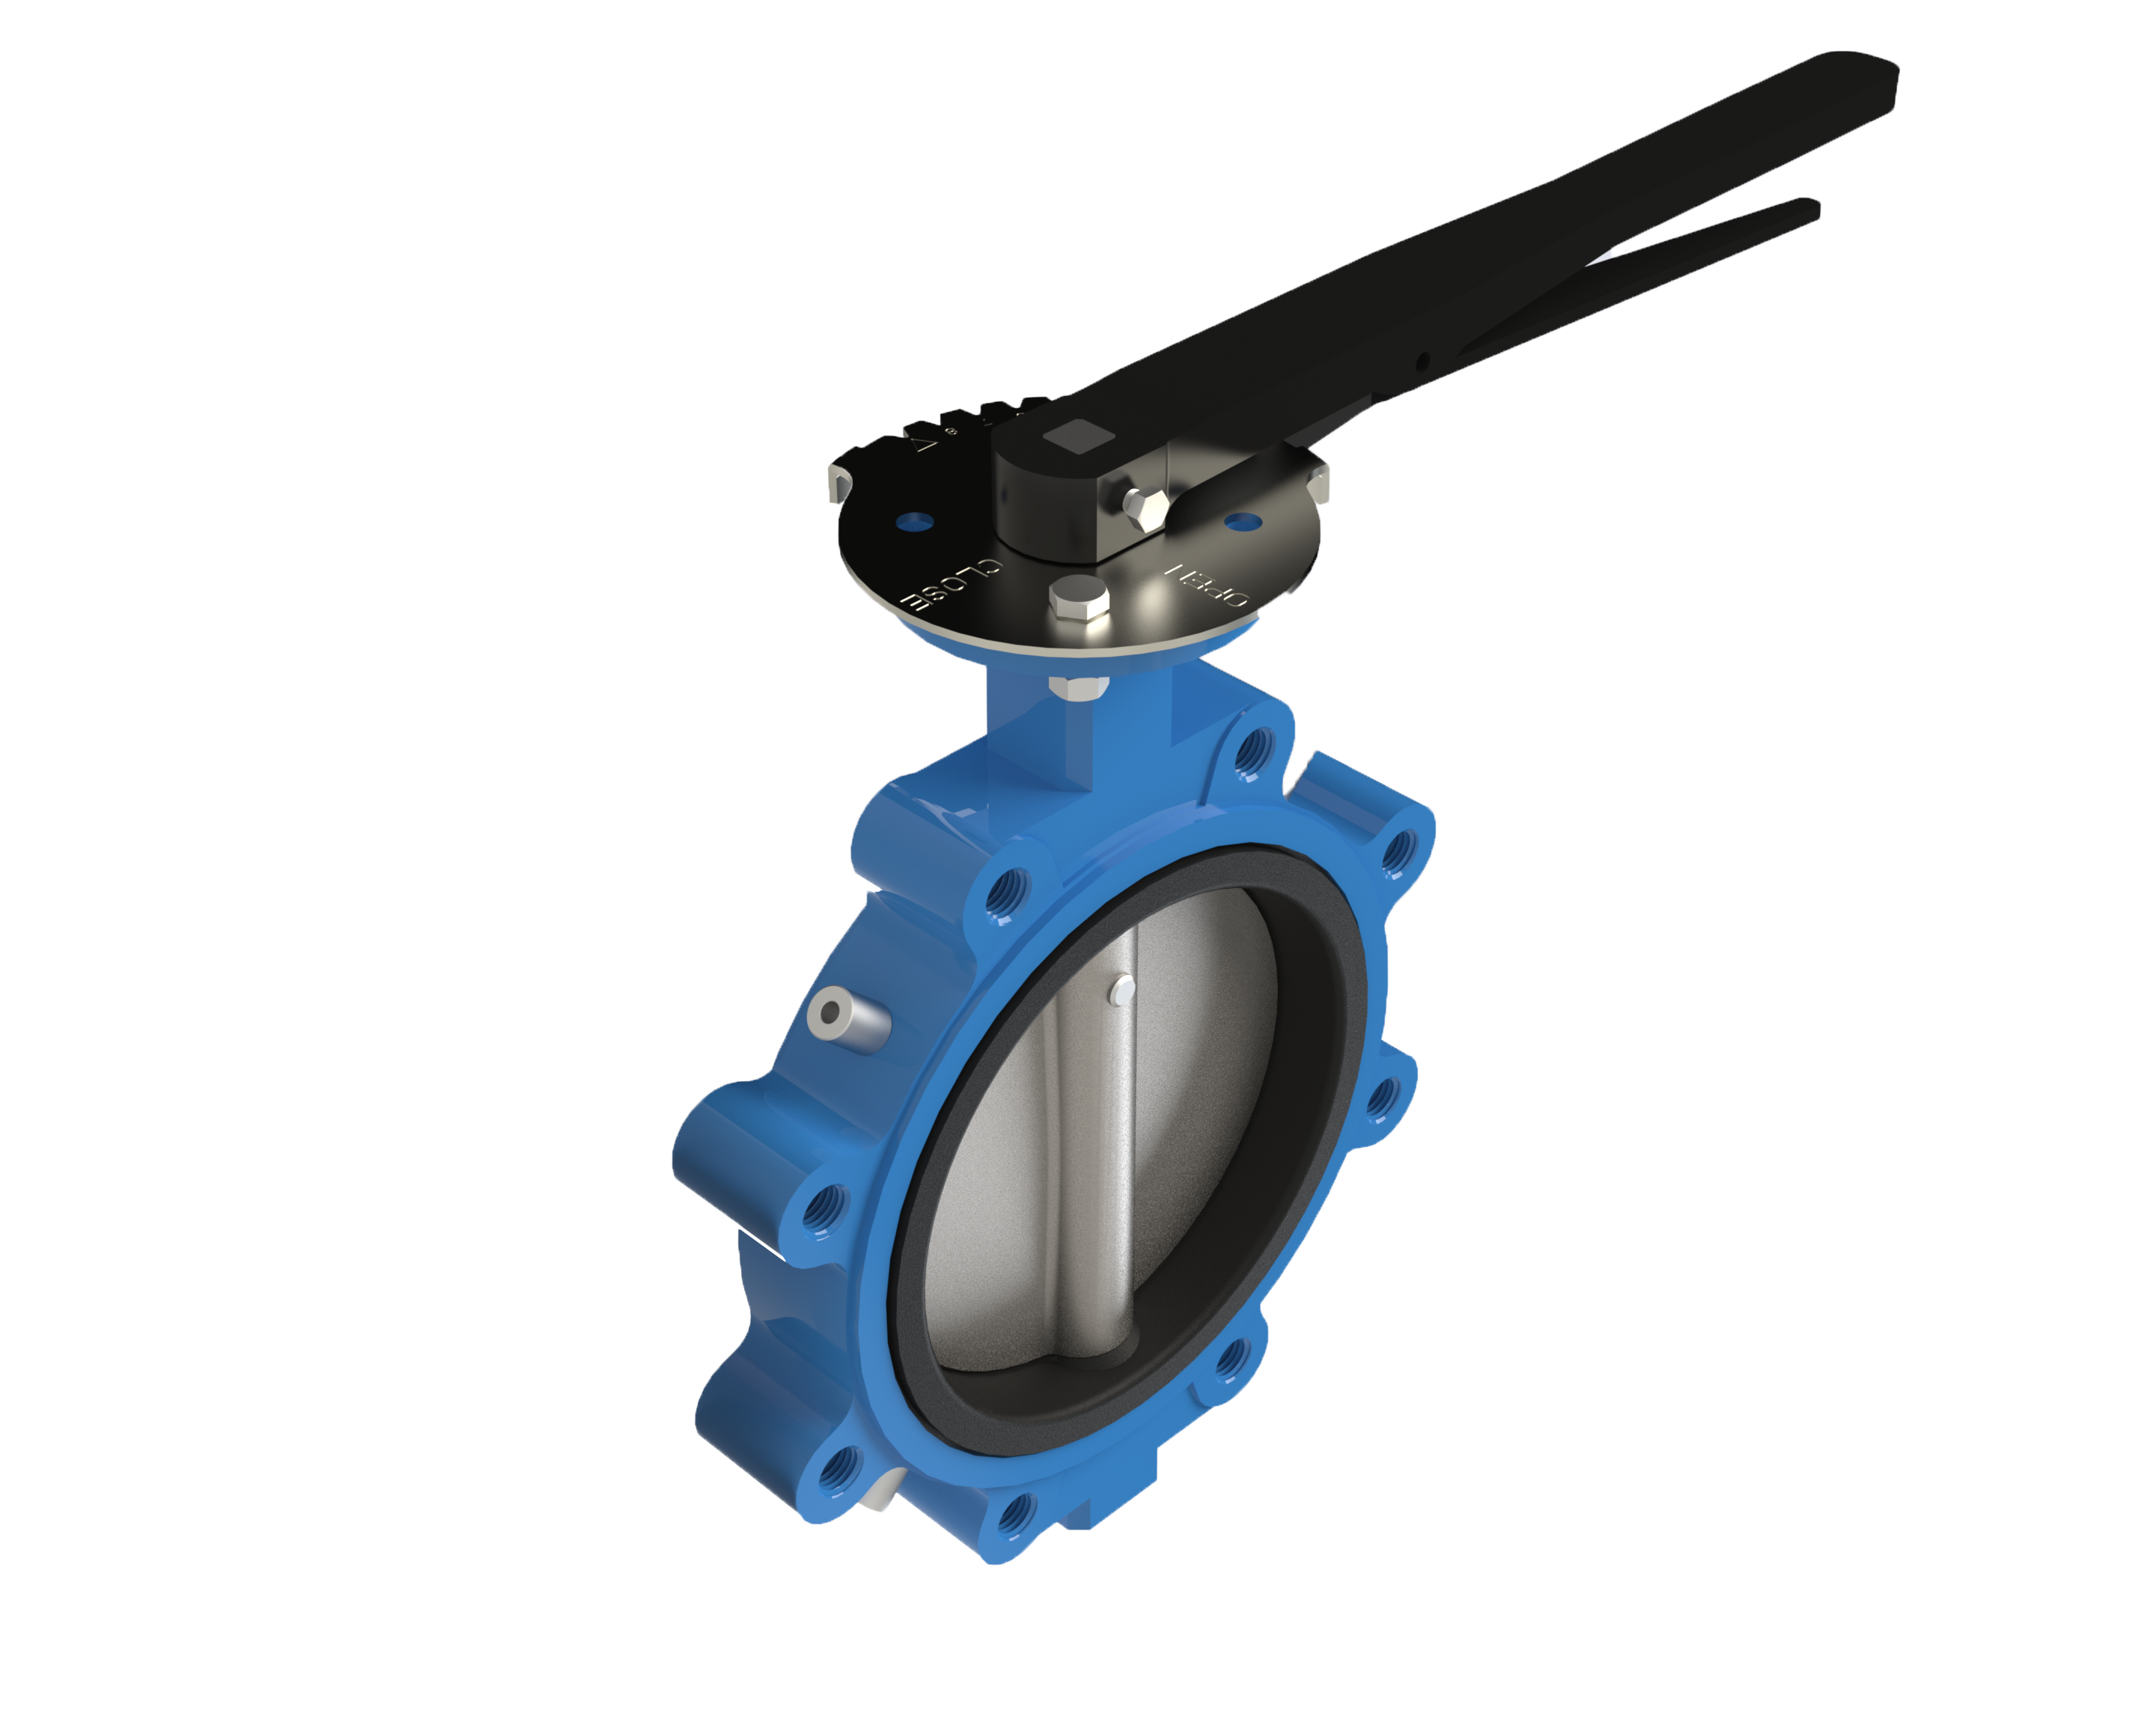 SLB Series Butterfly Valve